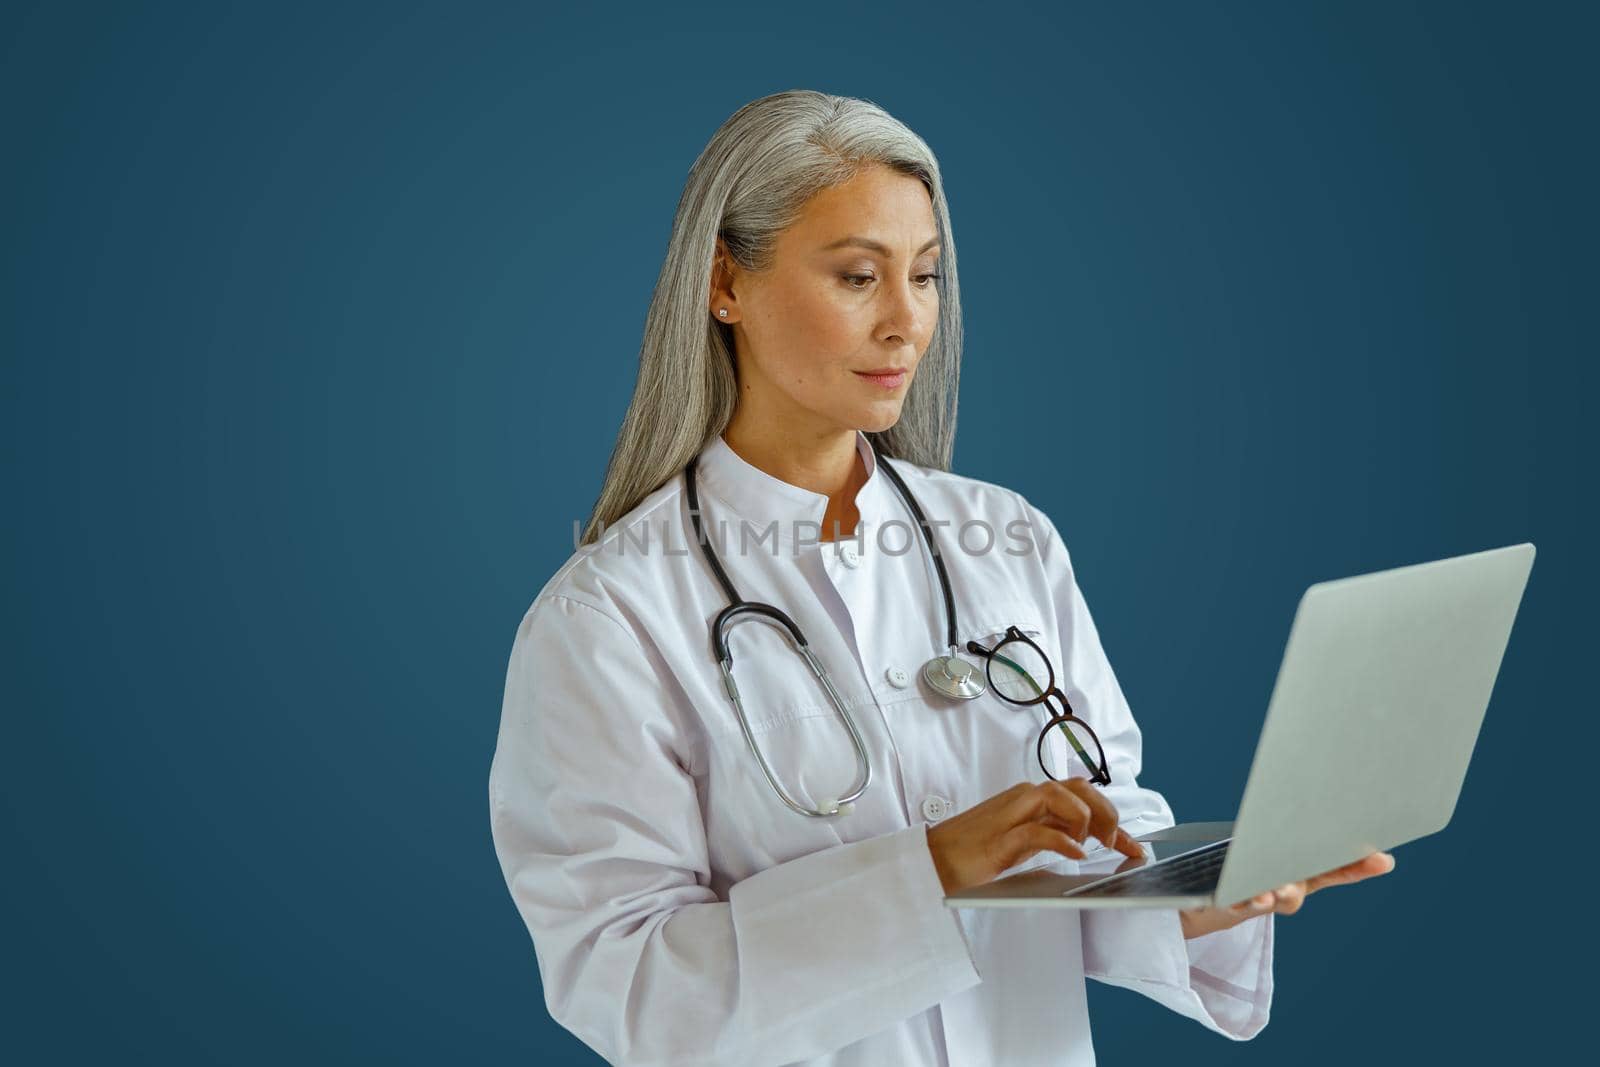 Concentrated grey haired woman doctor with stethoscope works on laptop standing on blue background in studio. Telemedicine patient service